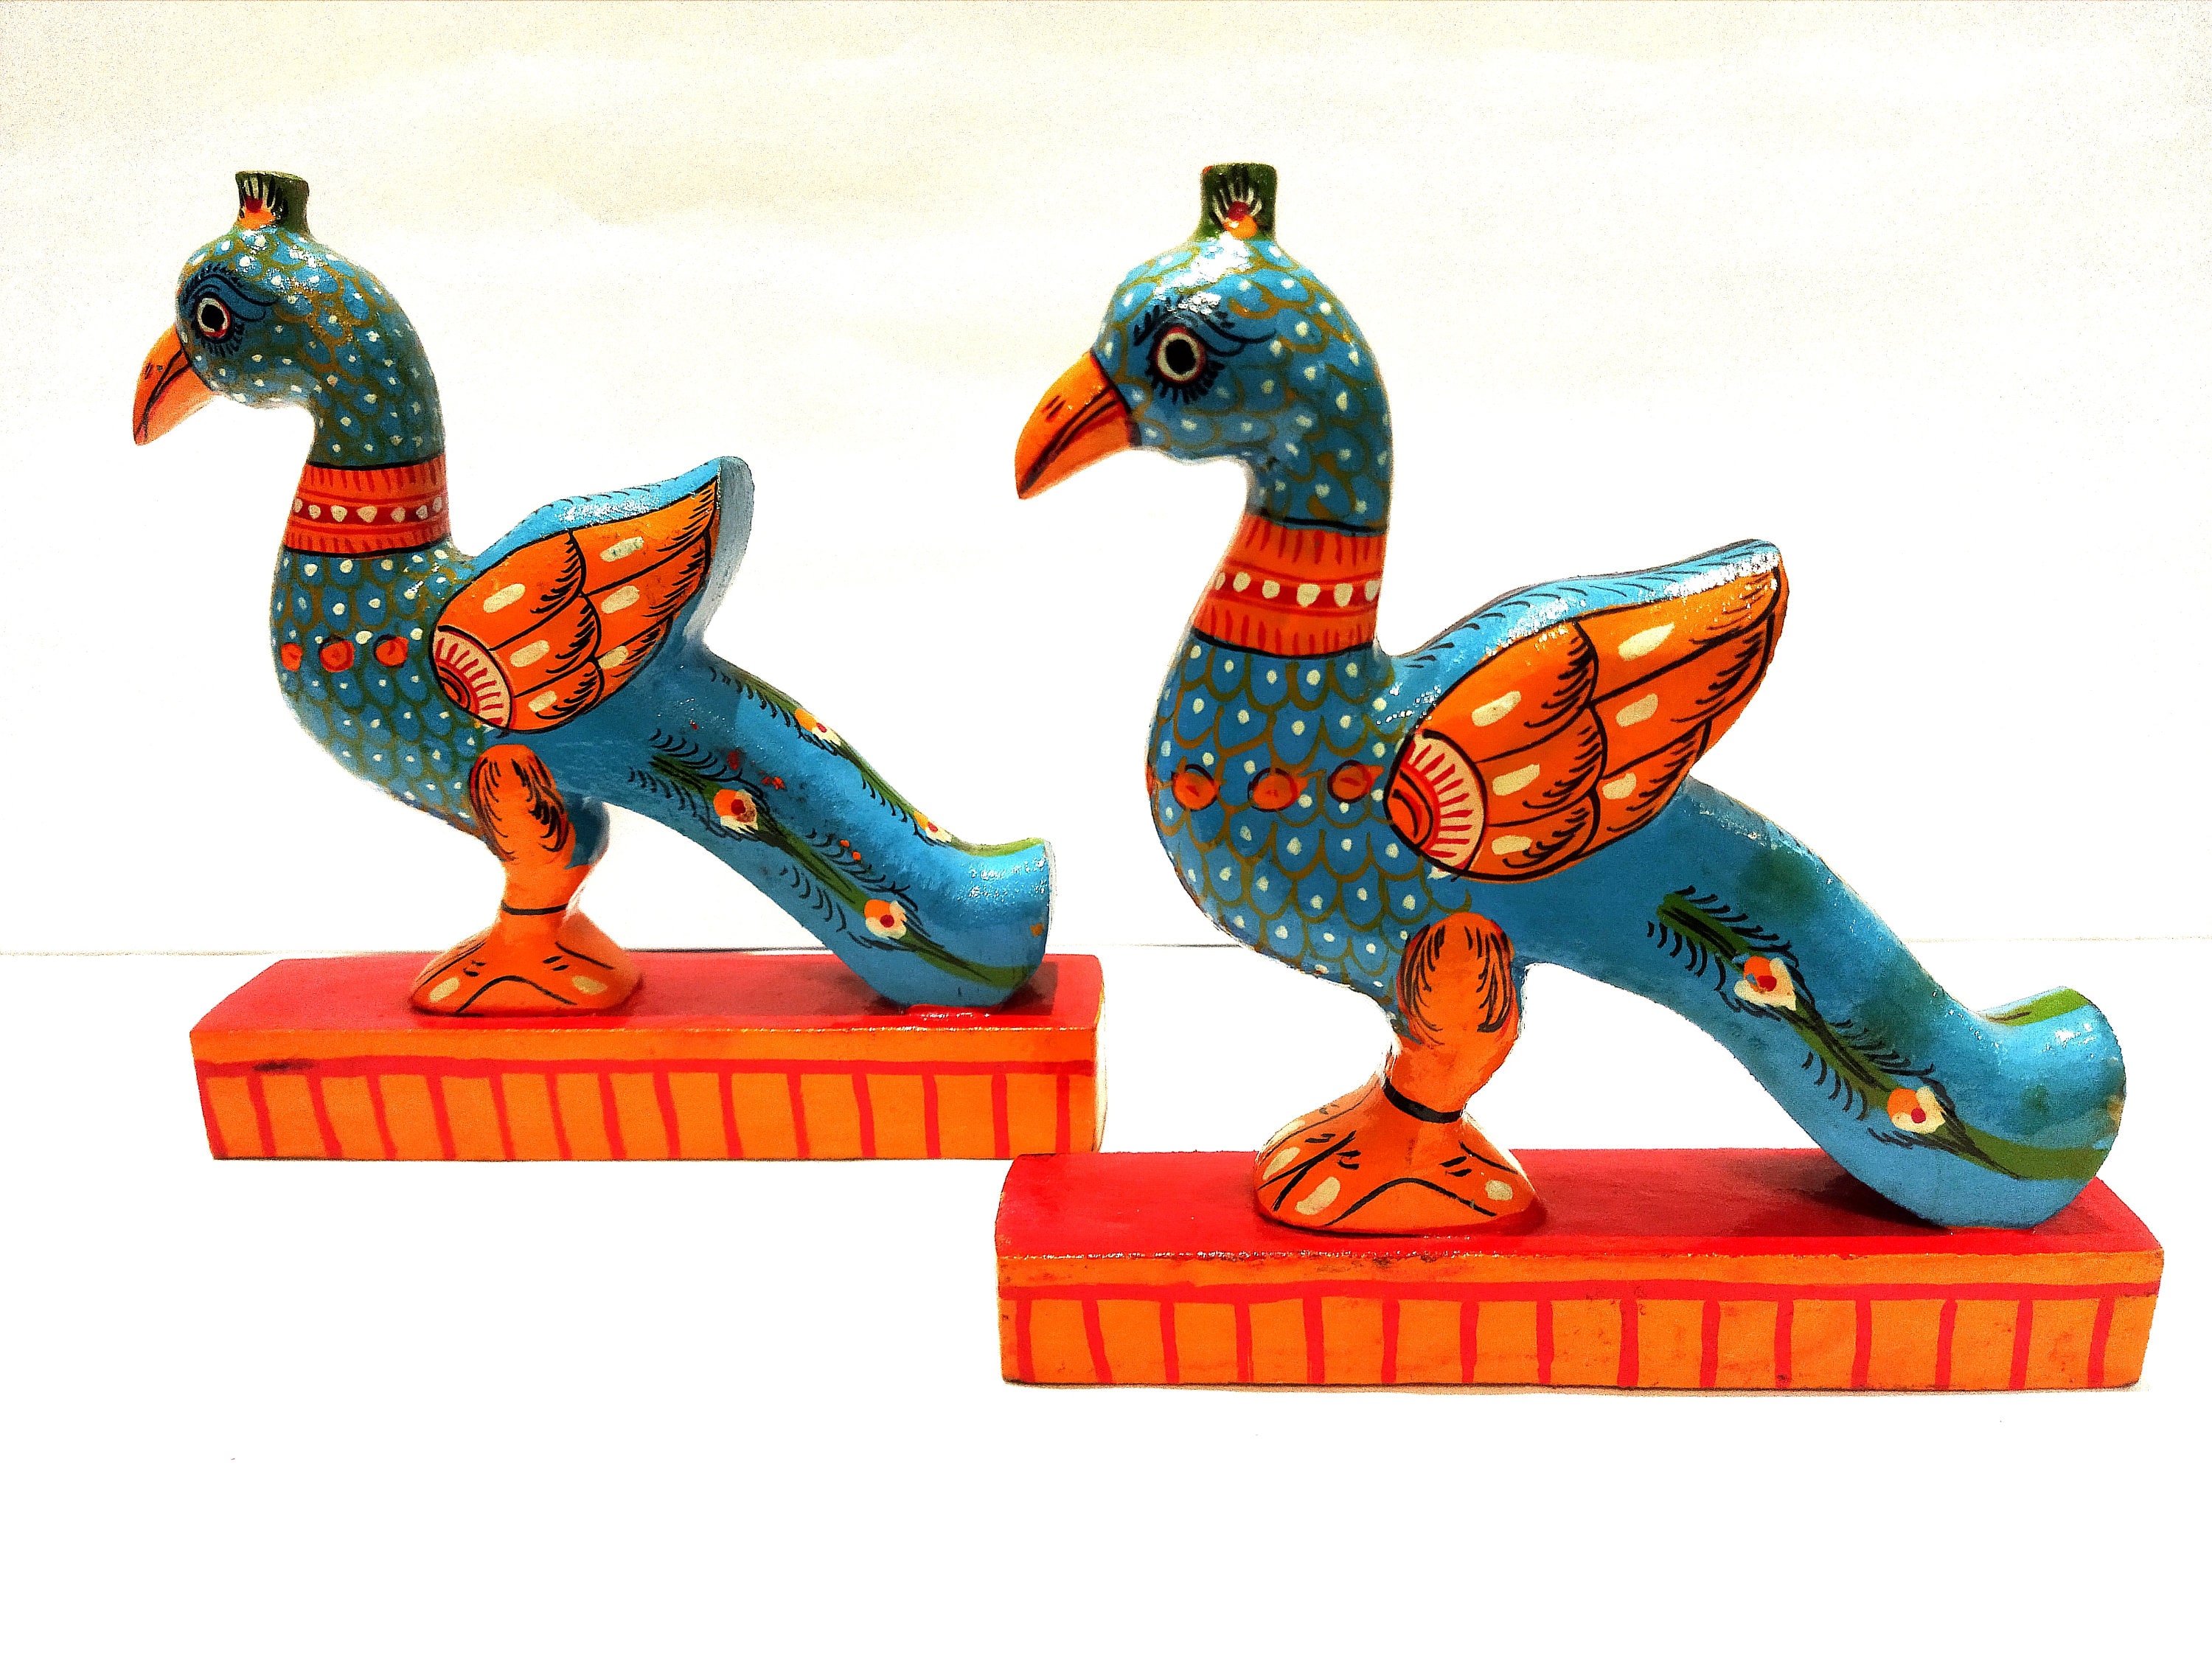 Wooden Toys Collection  Wooden Toys For Kids – The Playful Peacock